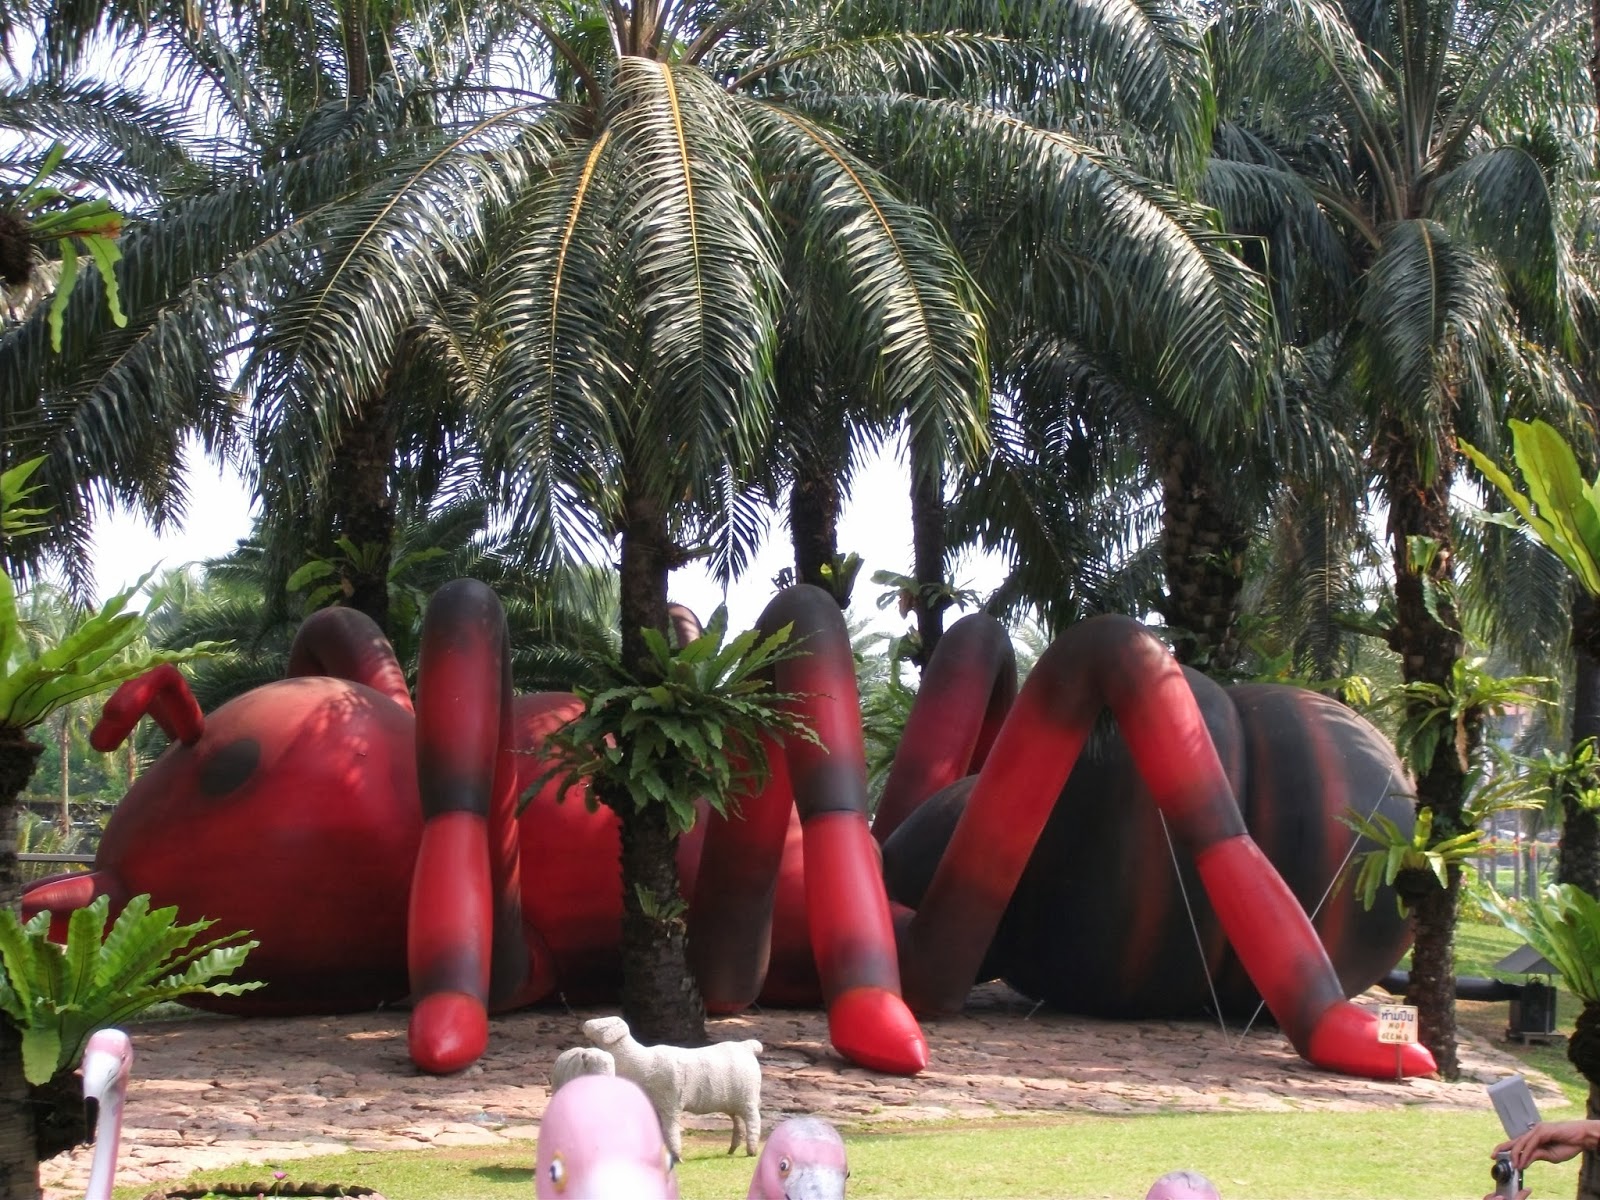 Giant ant and lamb statue  at Nong Nooch Tropical Garden.